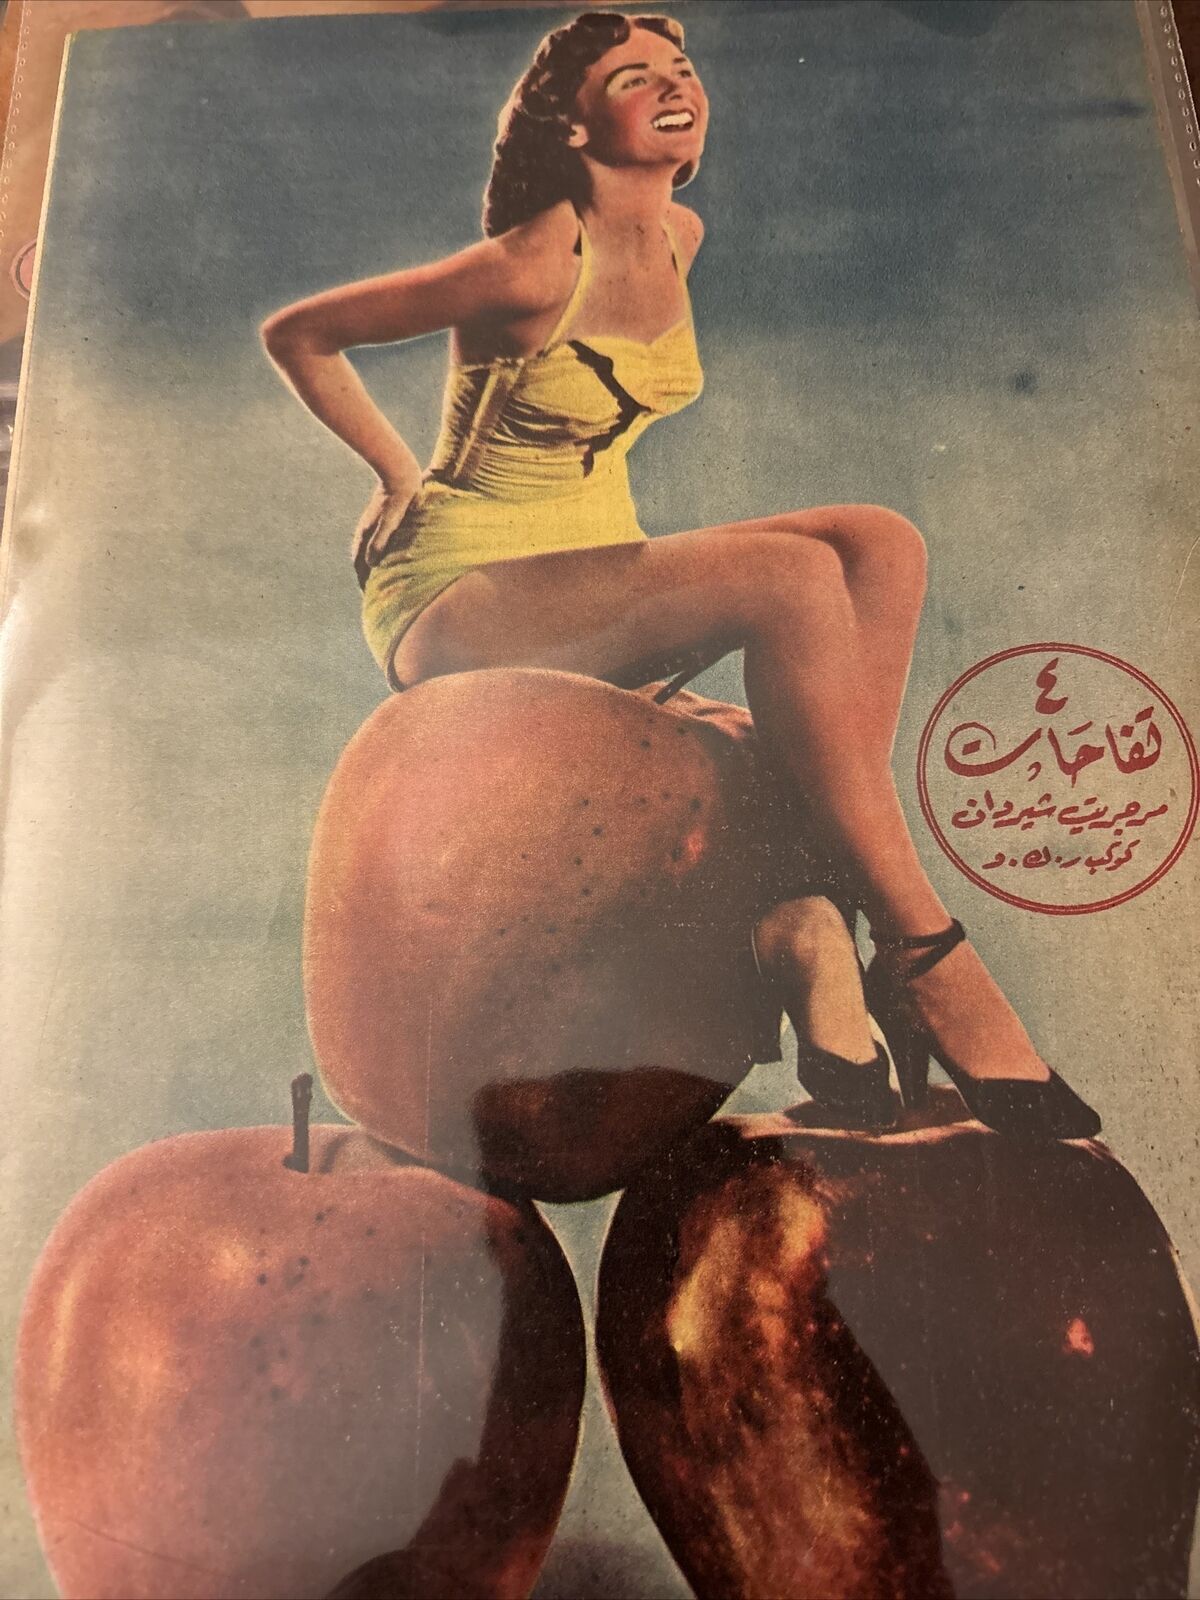 1955 Fan Magazine Actress Margaret Sheridan Cover Arabic Scarce Cover Great Cond